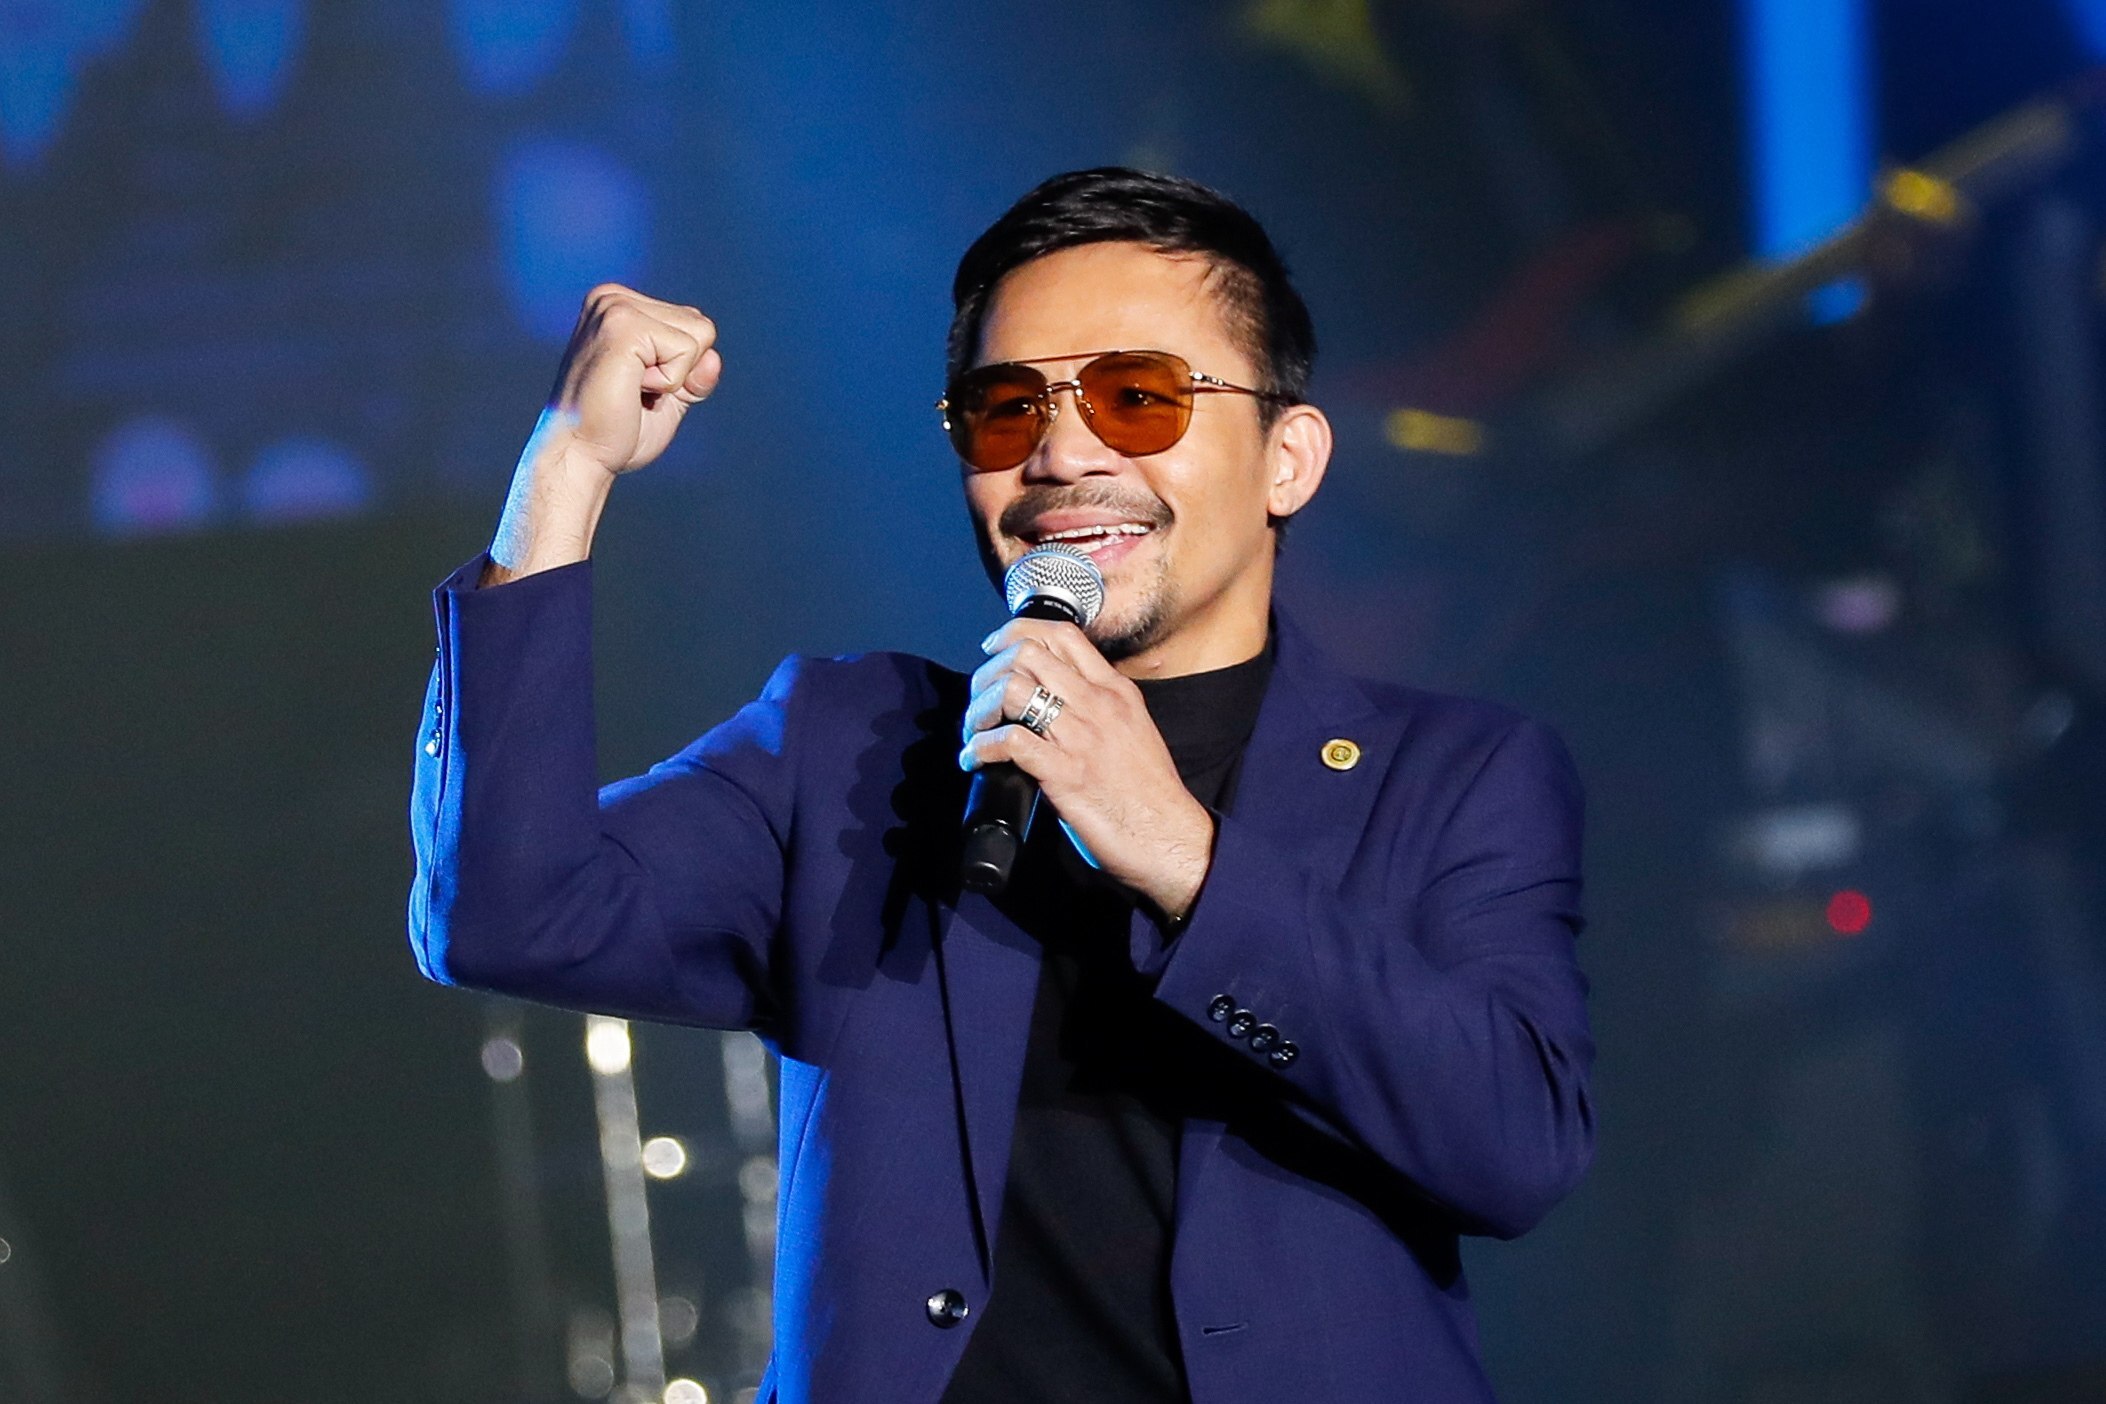 Legendary Filipino boxing champion and senator Manny Pacquiao at the launch of his own crypto currency in Manila in September 2019. In September, Pacquiao, the first fighter to be world champion at eight different weights, accepted the nomination of his PDP-Laban party to run for president in 2022. Photo: EPA-EFE